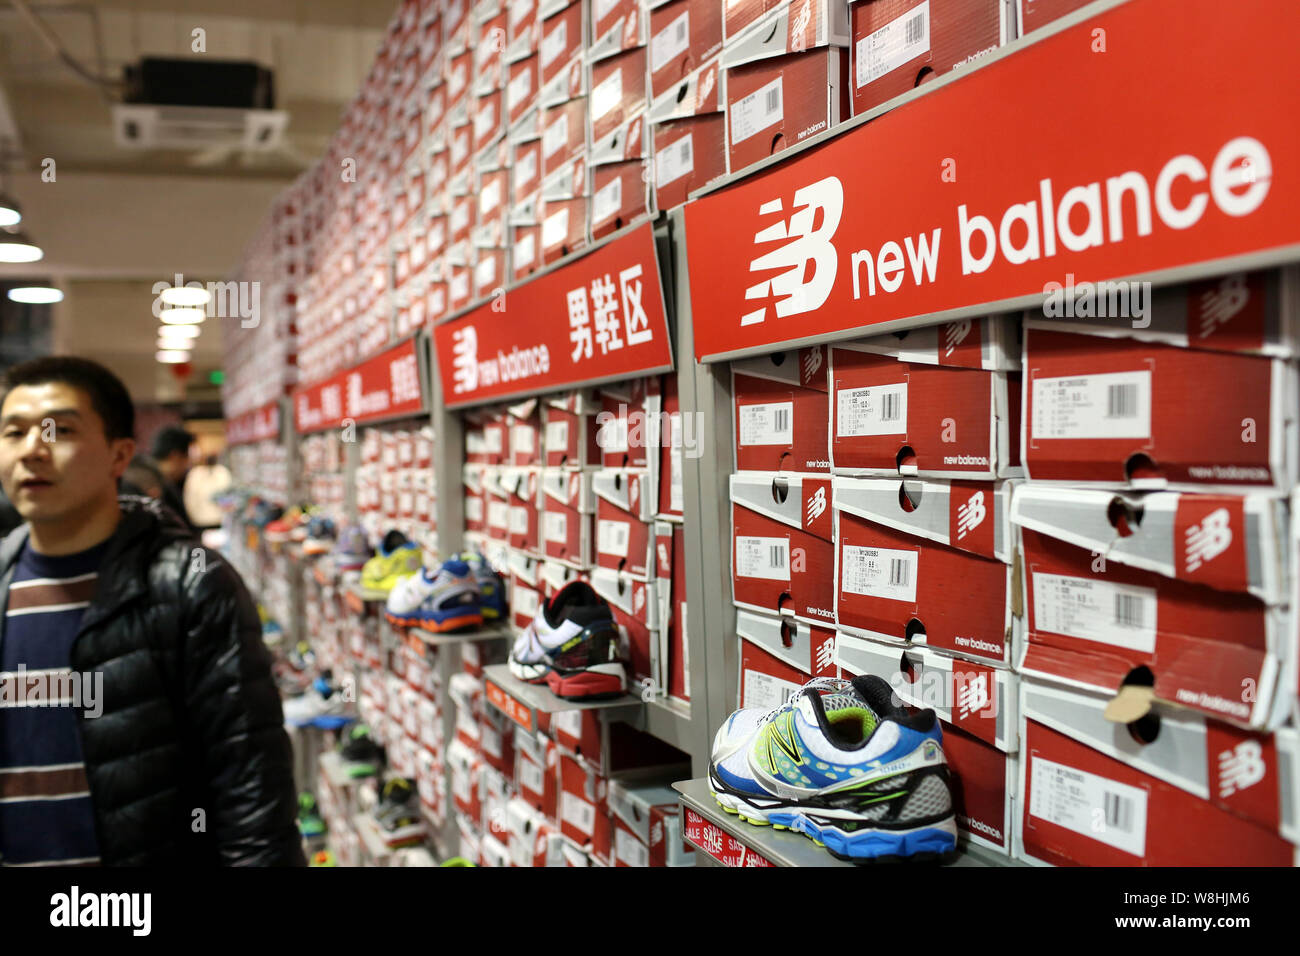 new balance shoe outlet near me